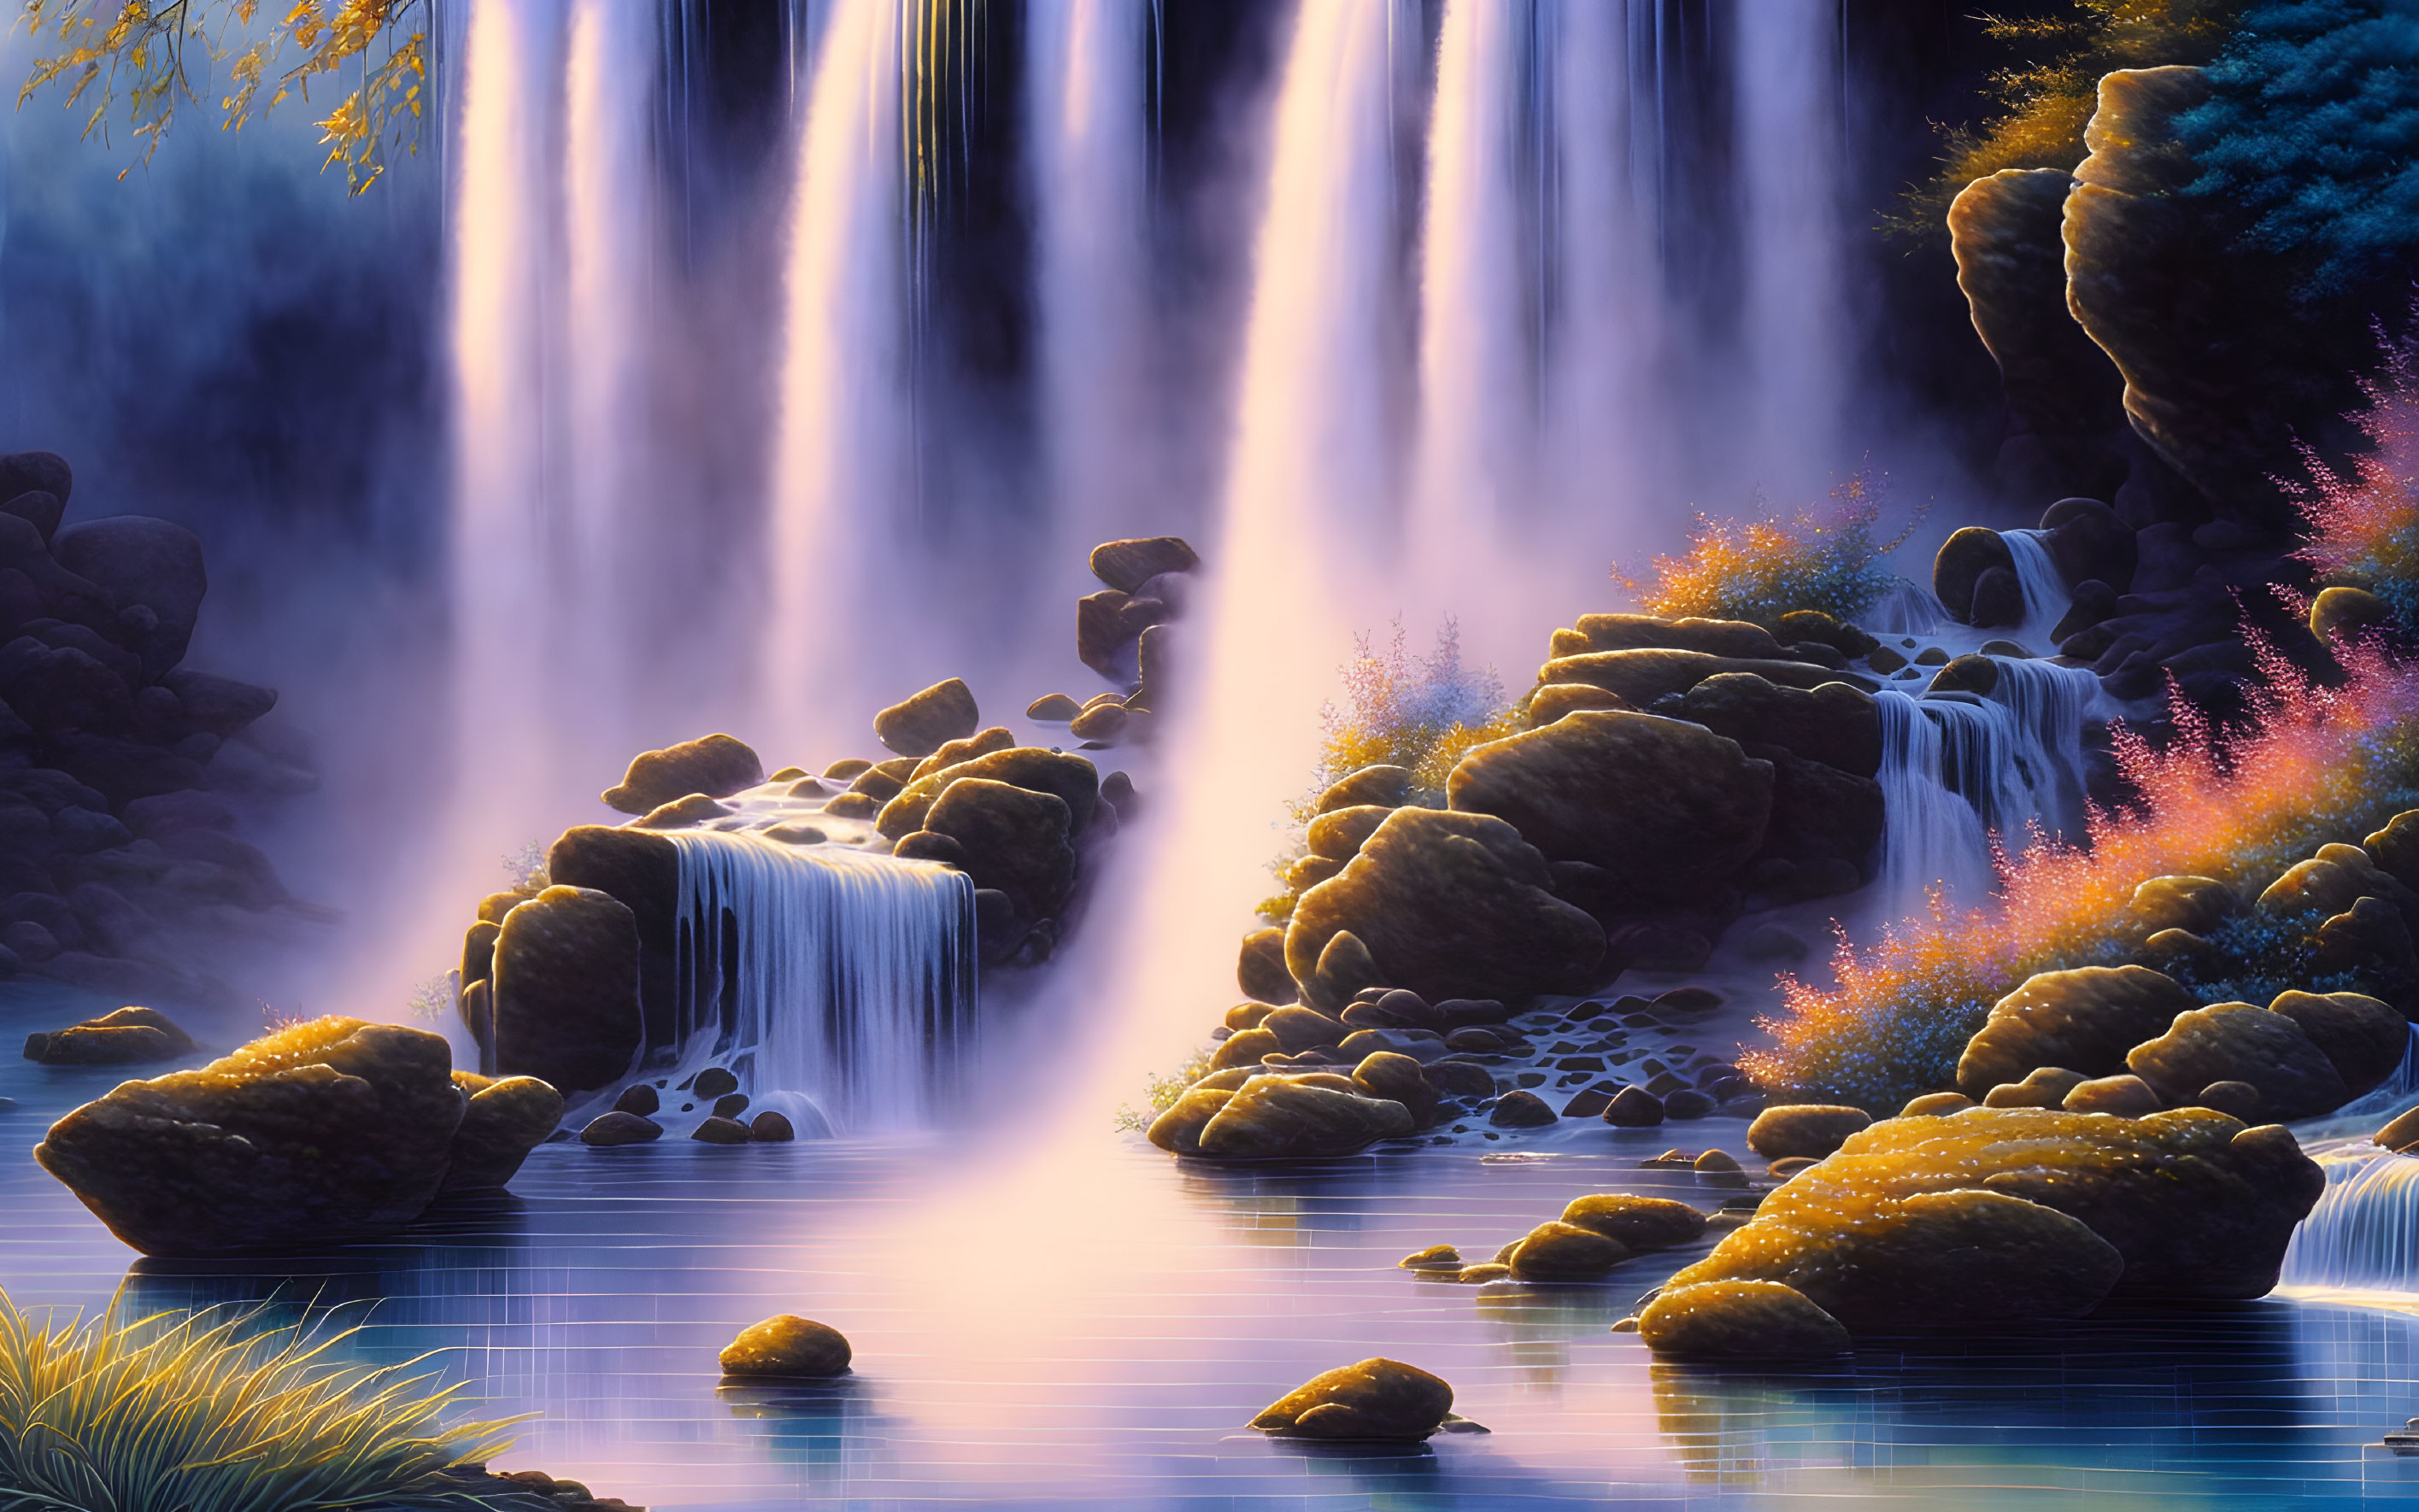 Enchanted Waterfall: A Tranquil Oasis